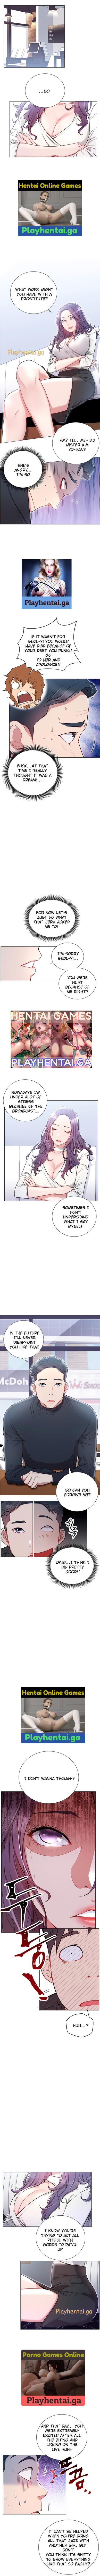 Bus LIVE WITH : DO YOU WANT TO DO IT Ch. 7 Cute - Page 8